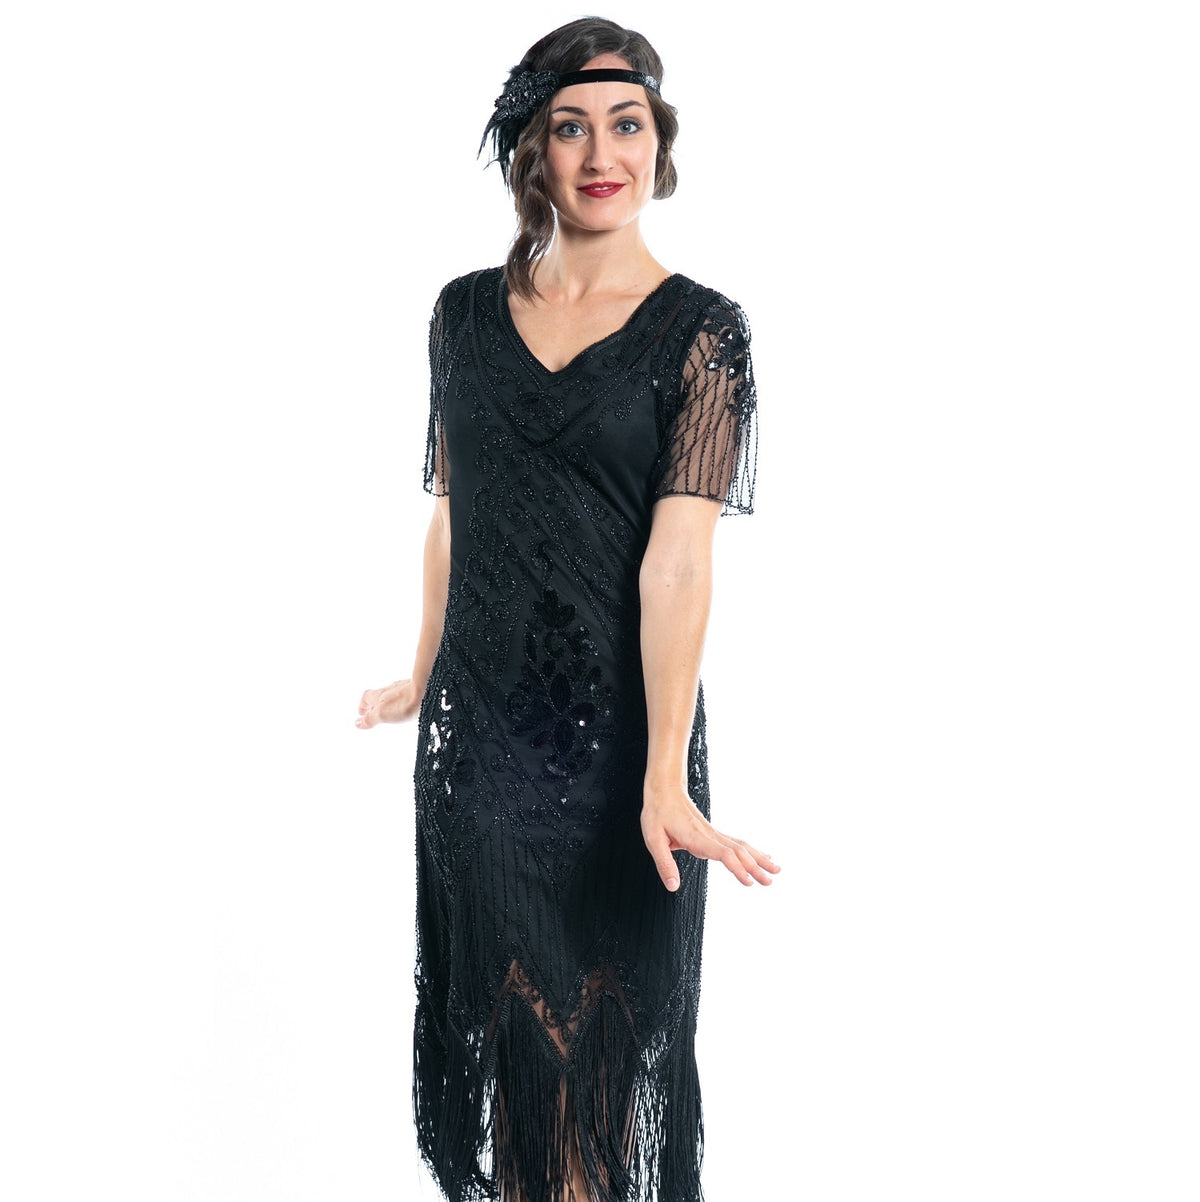 A Plus Size Black Gatsby Dress with sleeves, sequins and beads